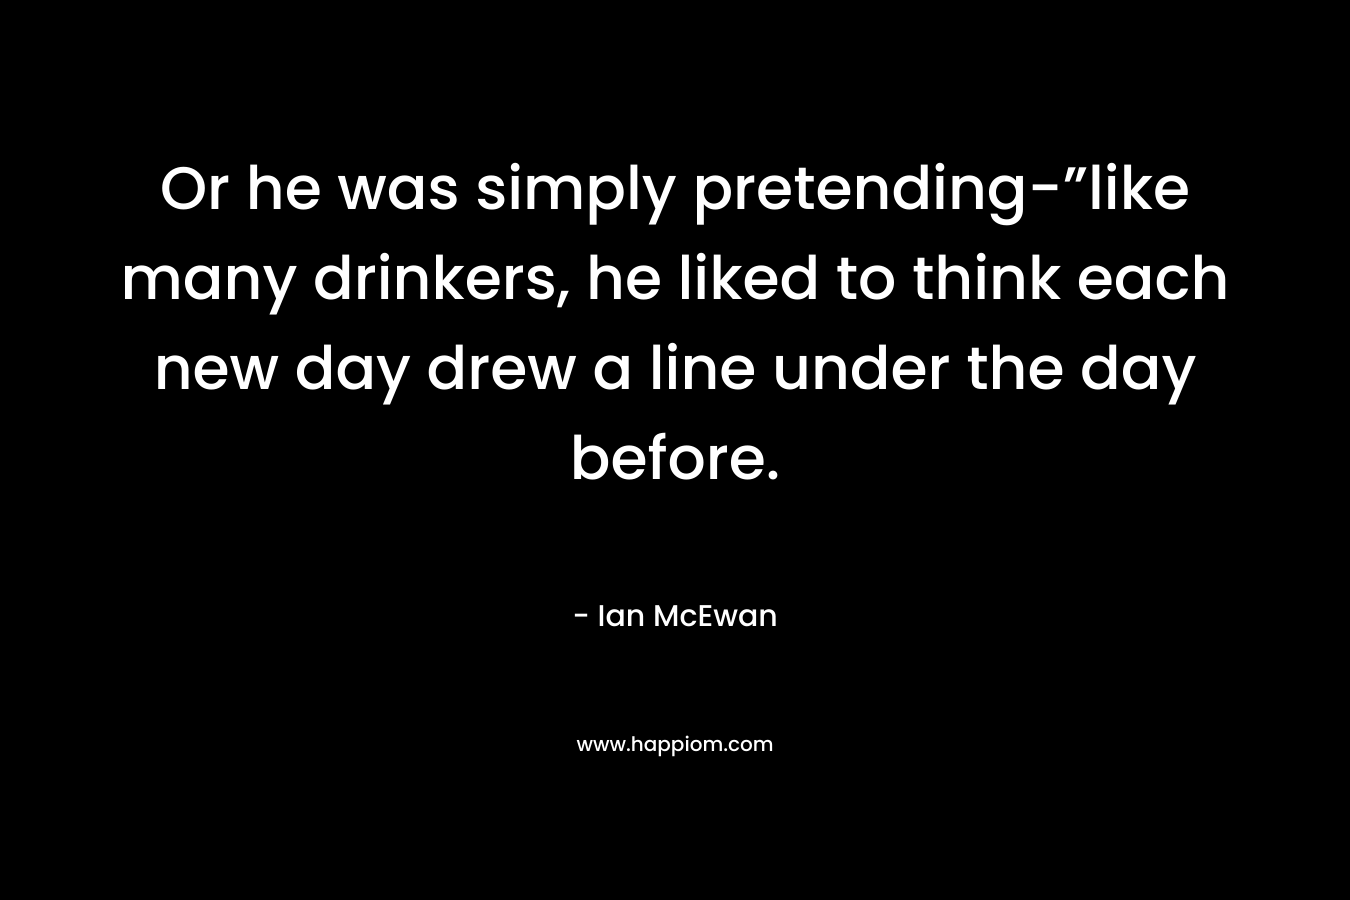 Or he was simply pretending-”like many drinkers, he liked to think each new day drew a line under the day before. – Ian McEwan